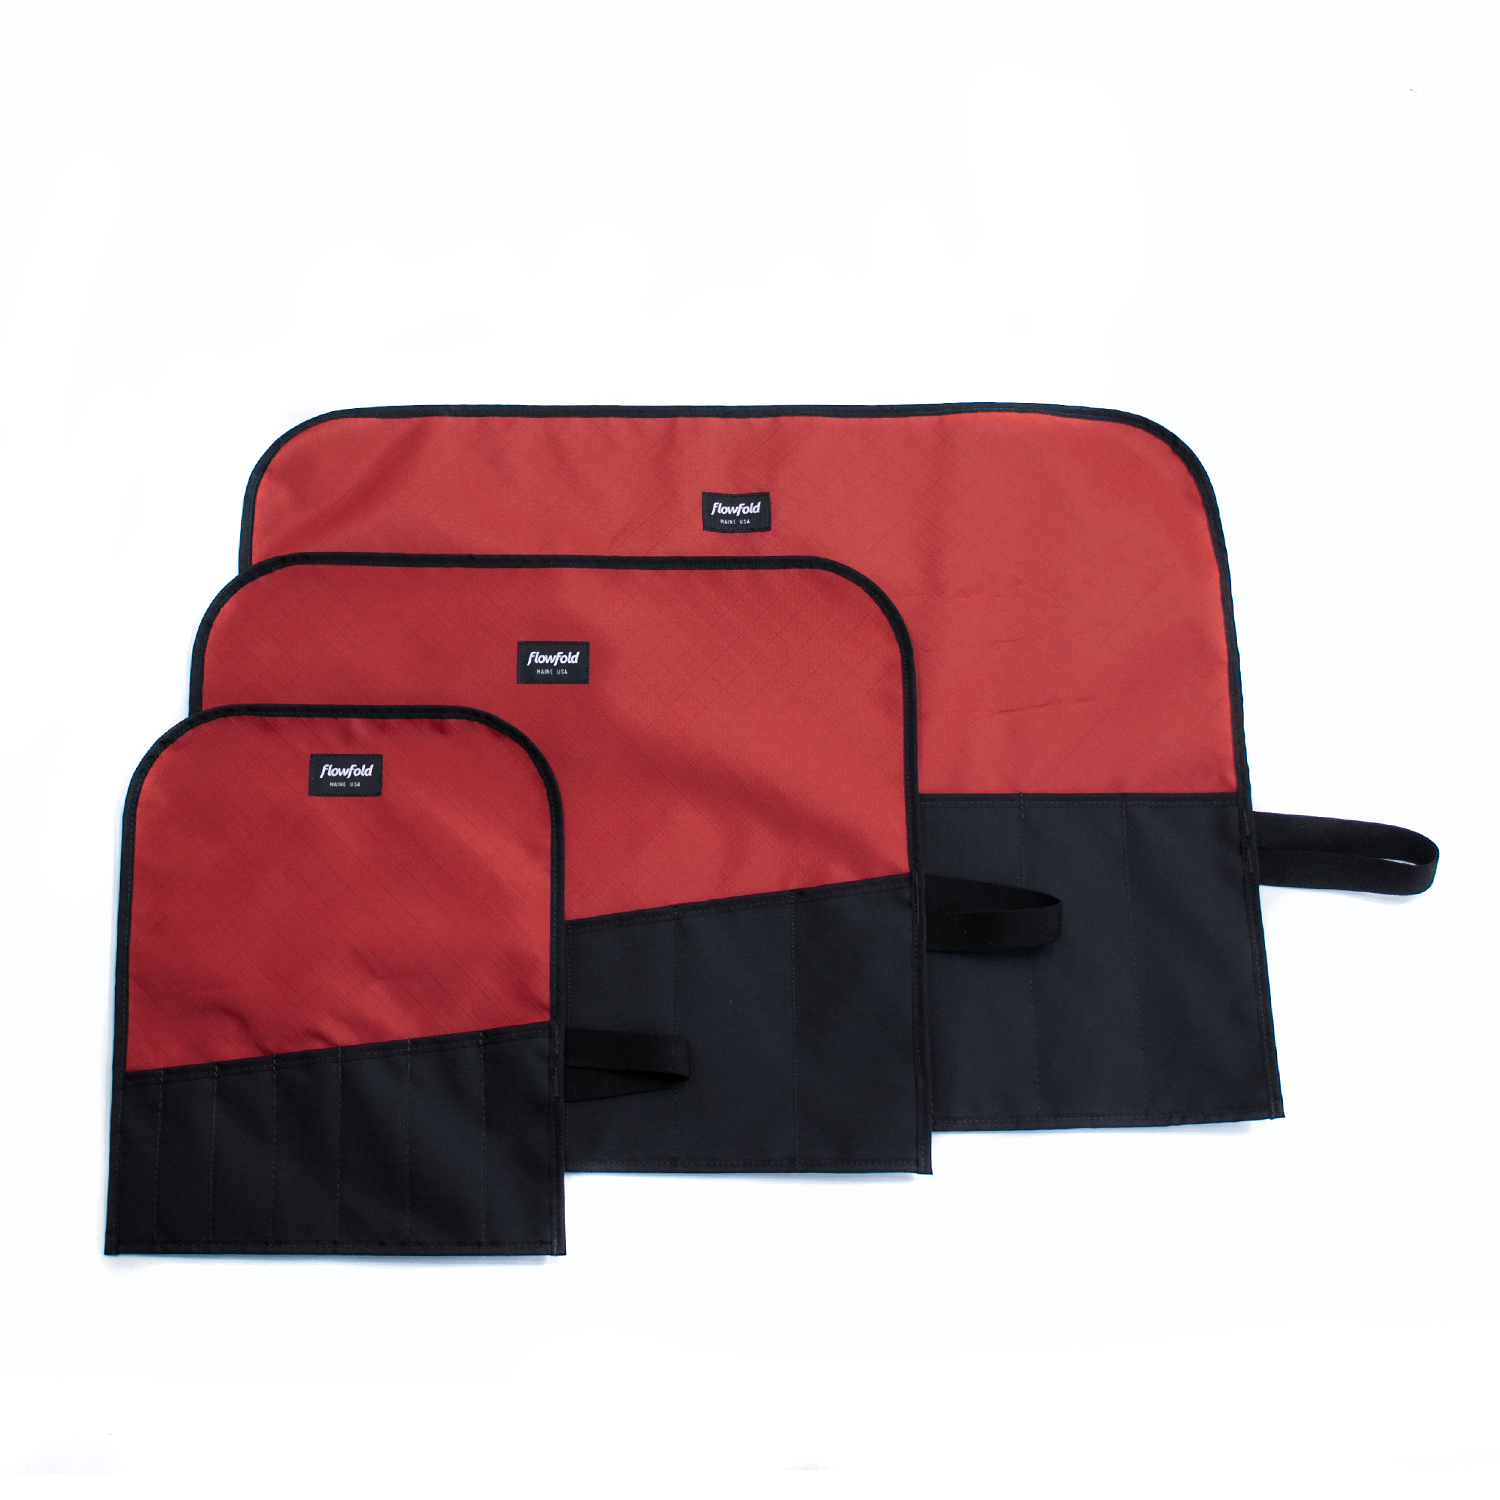 Flowfold Comrade Tool Roll Bundle - Brick Red, 100% Recycled fabric tool roll, water repellent and made in USA